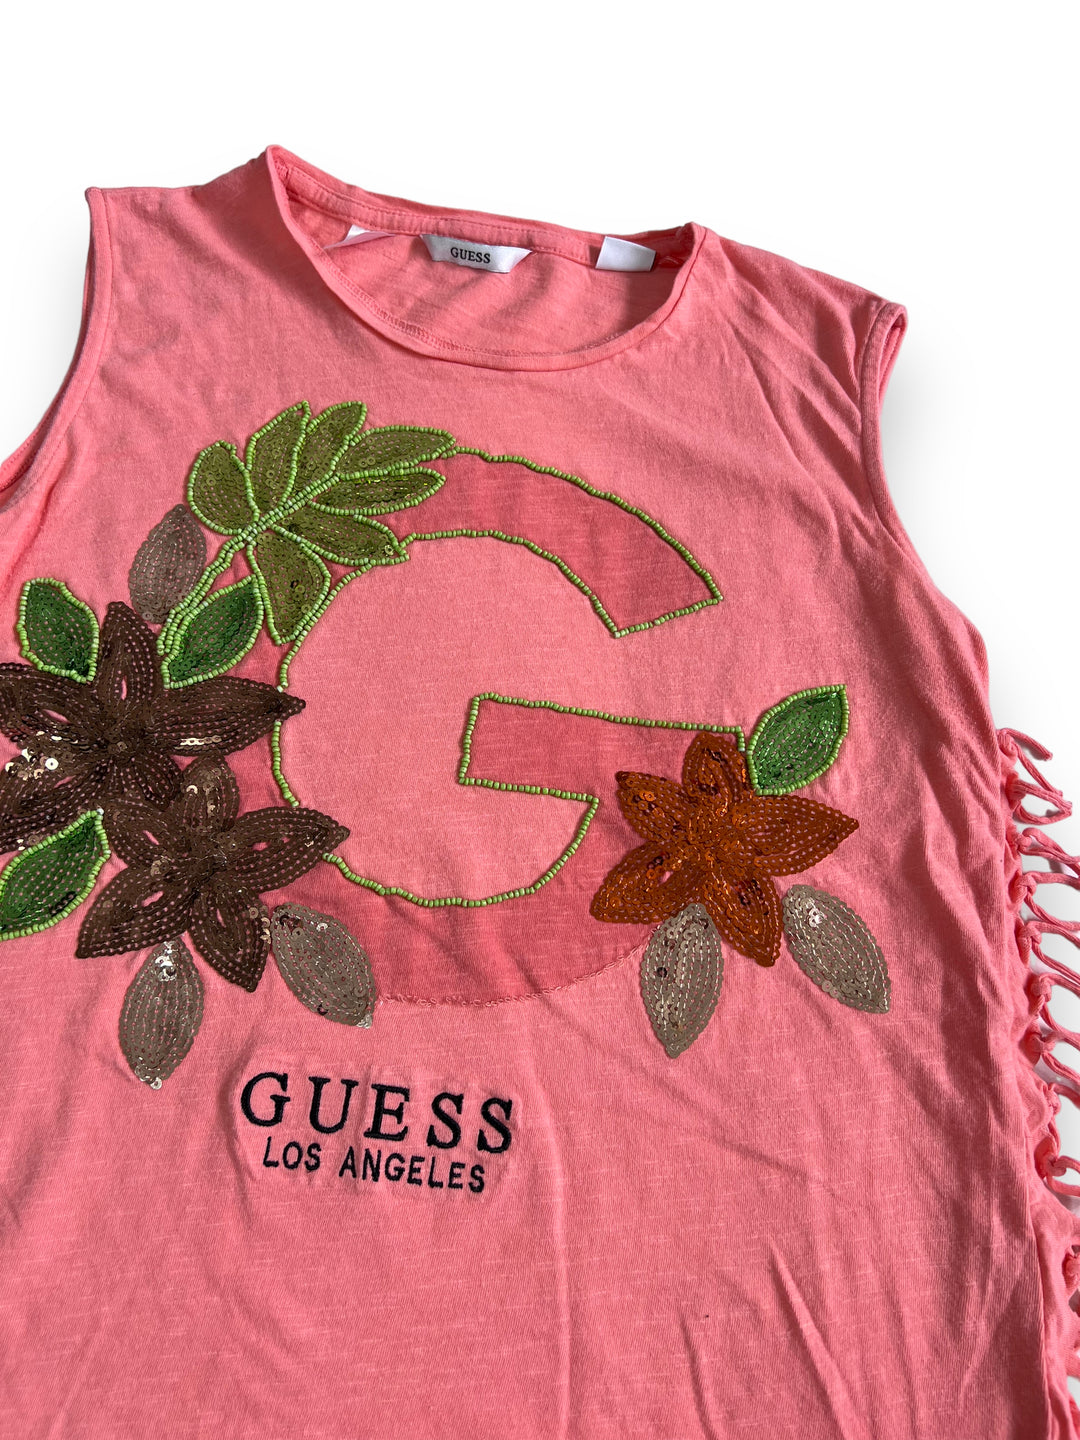 Guess Vest Top Women’s Extra Small